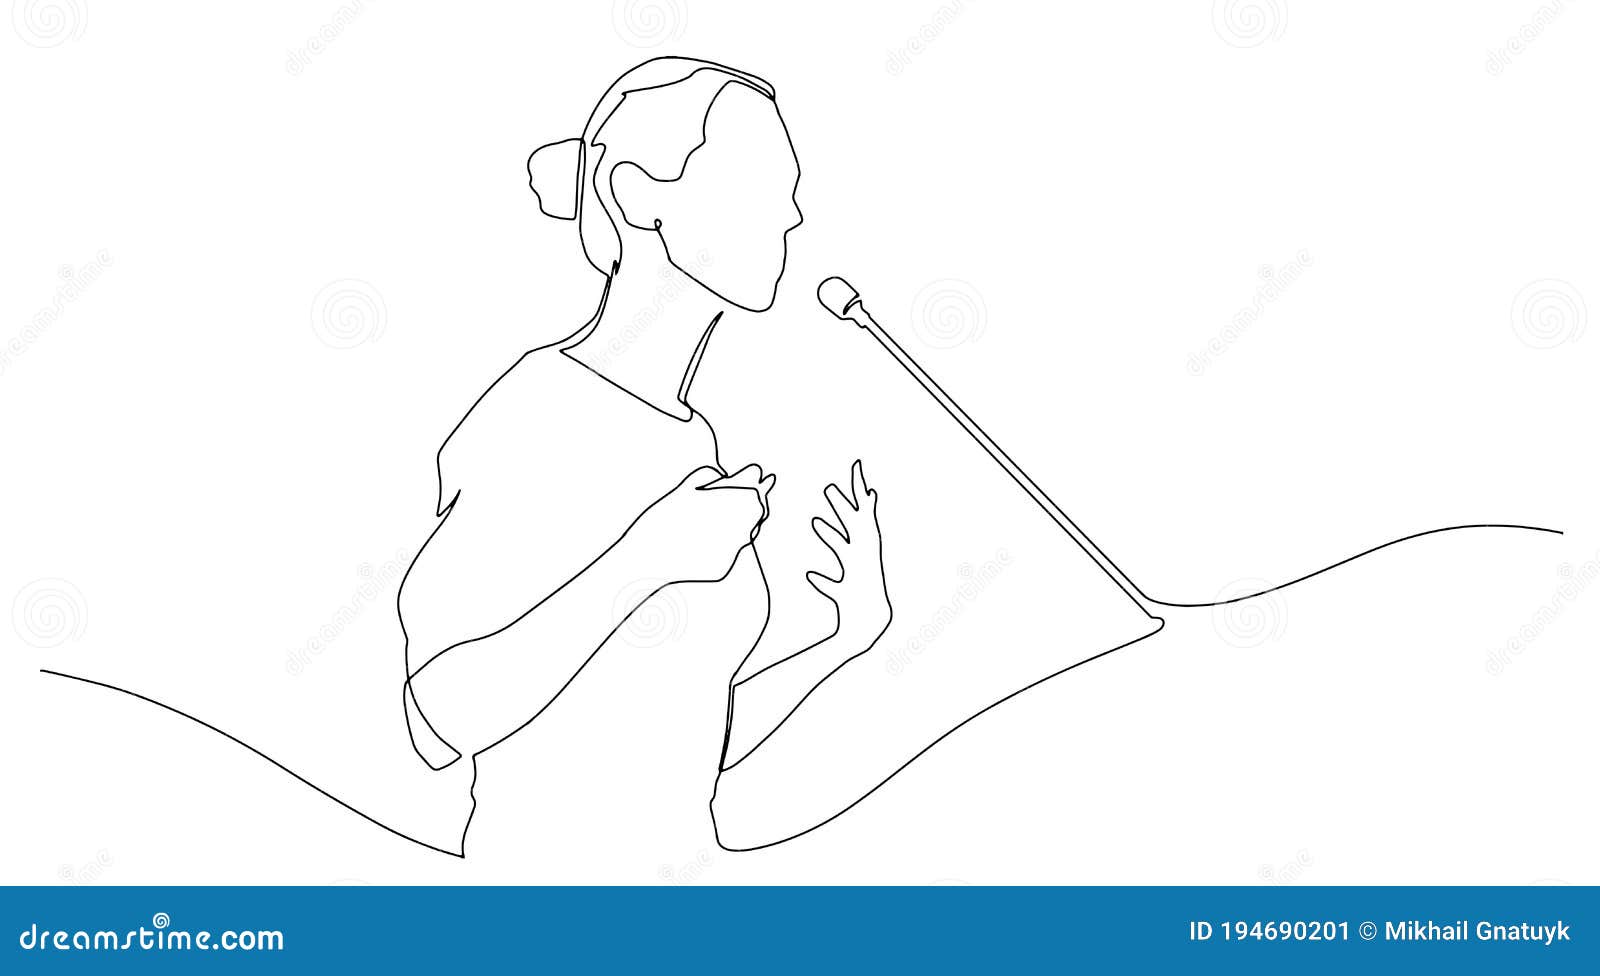 continuous line drawing business presentation woman trainer talking one single line drawn character politics speaker